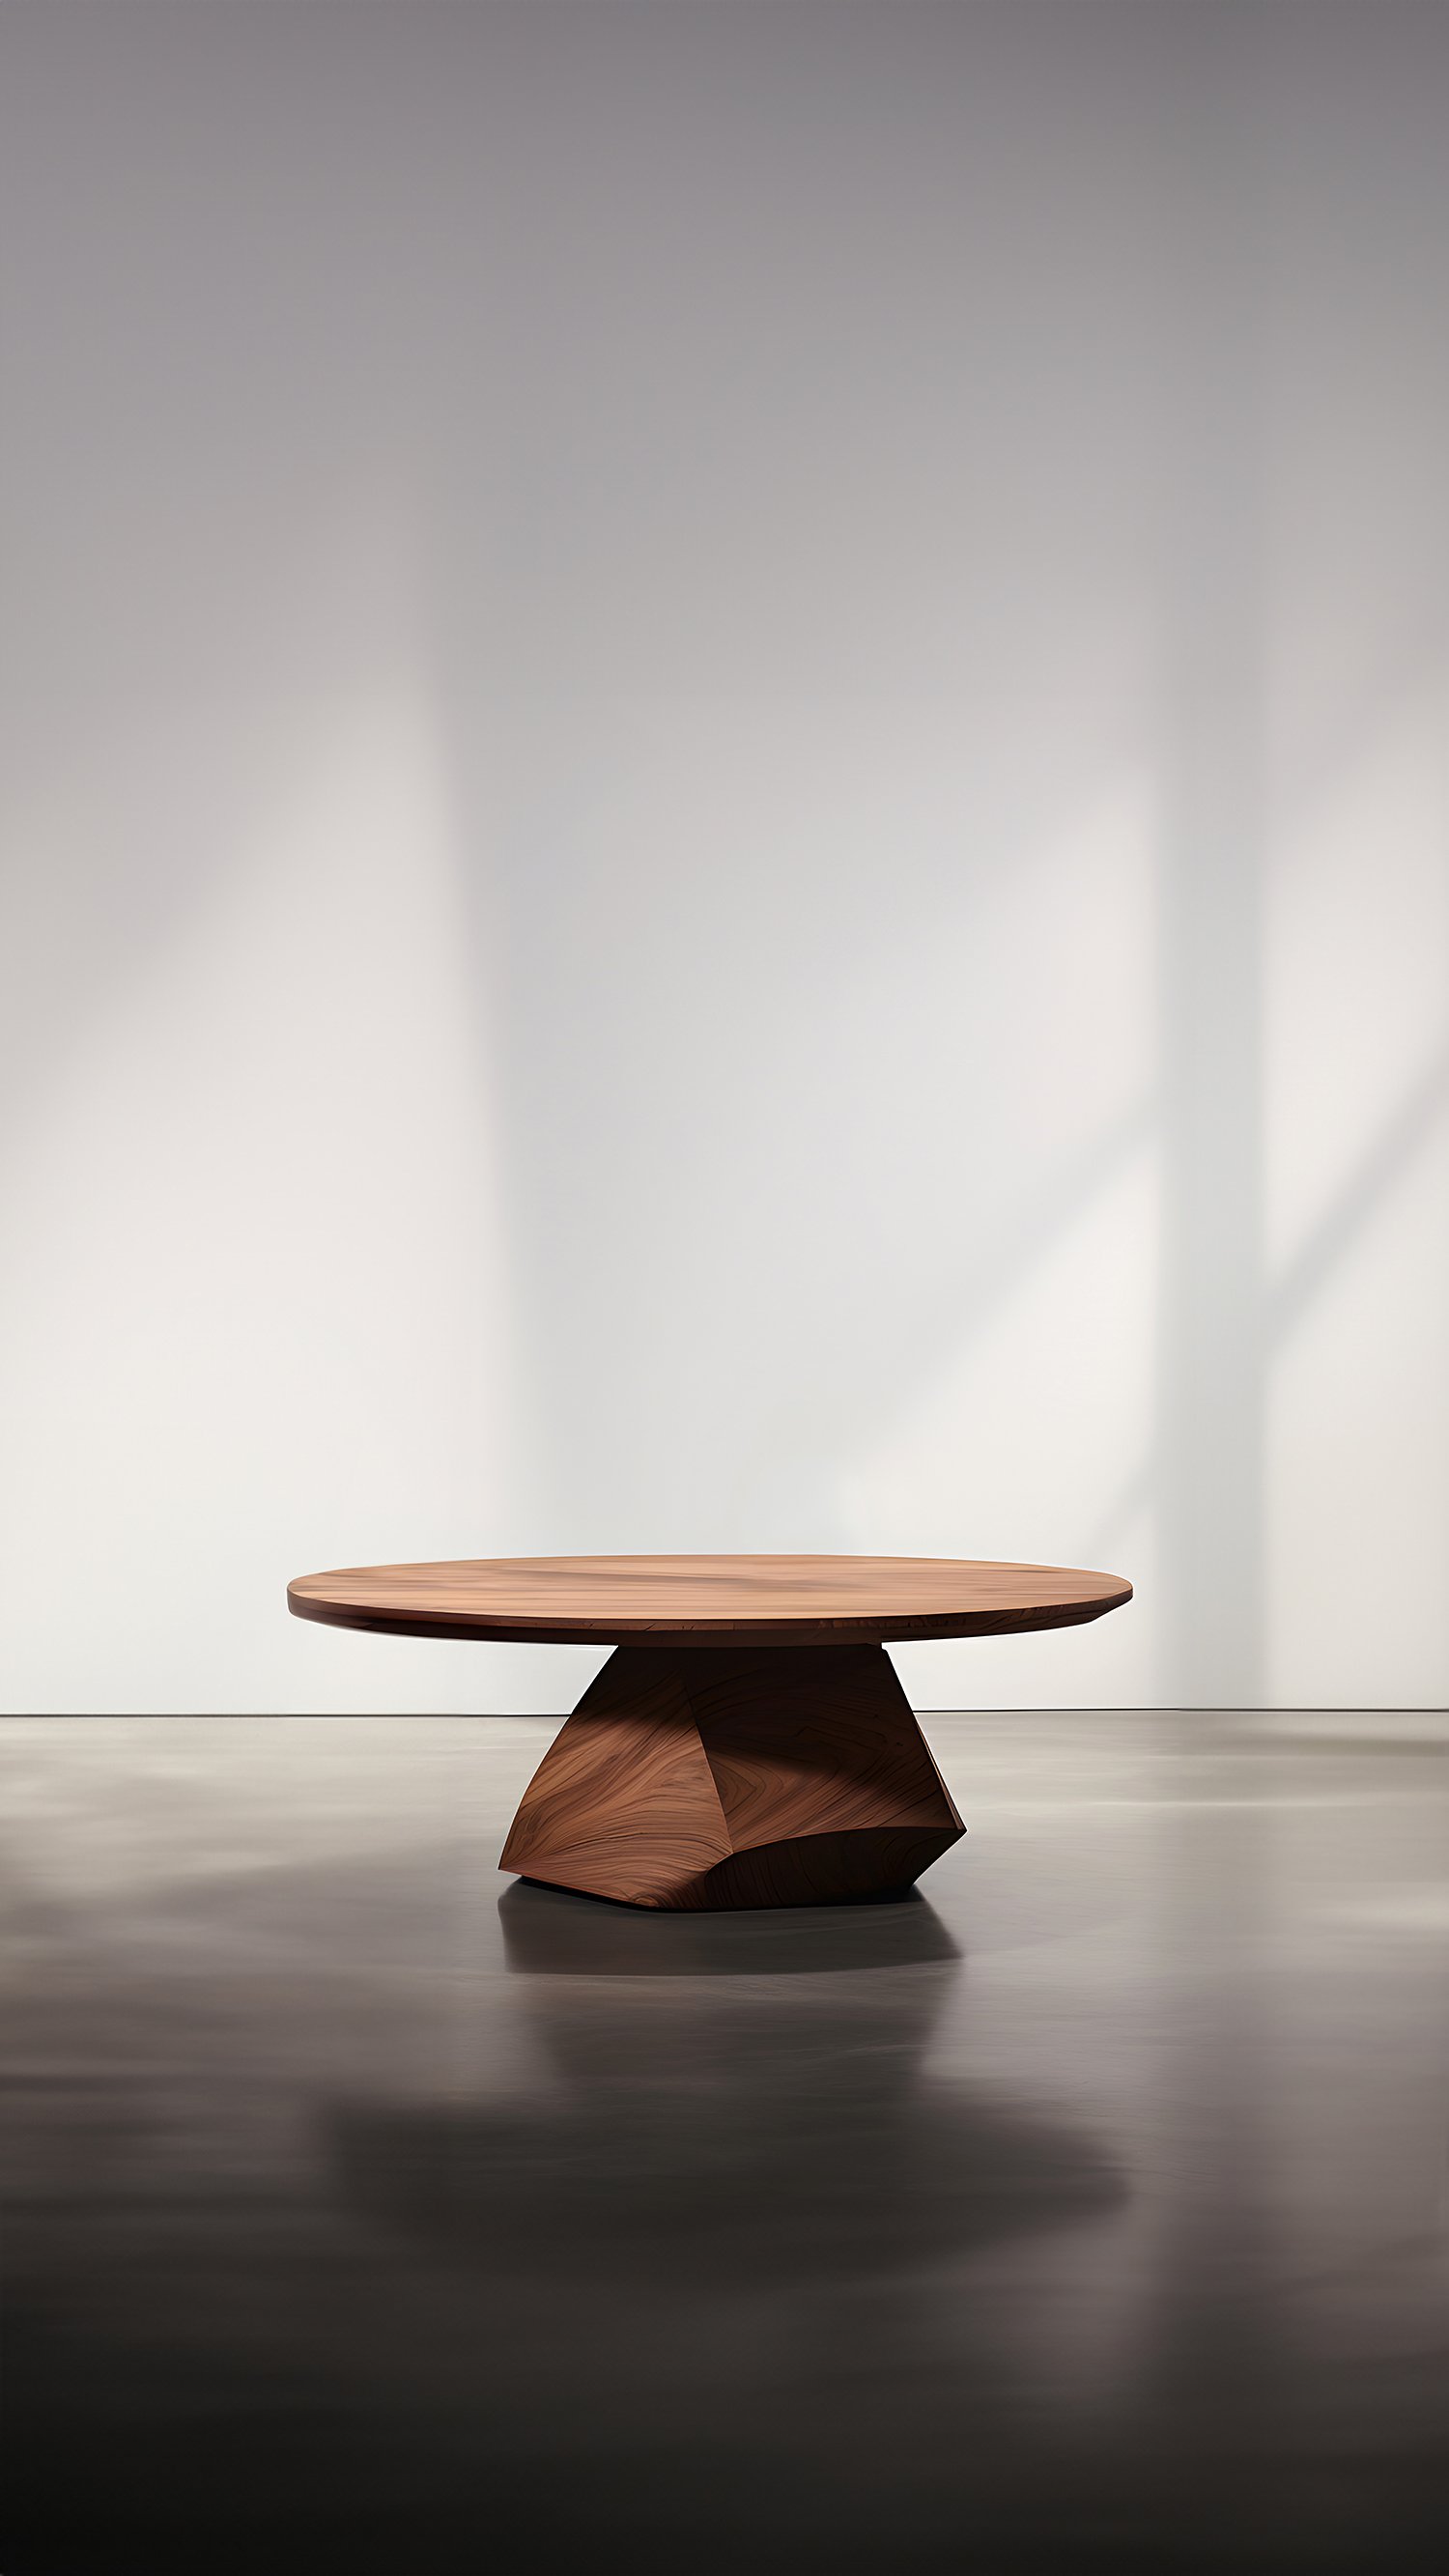 Sculptural Coffee Table Made of Solid Wood, Center Table Solace S29 by Joel Escalona — 6.jpg